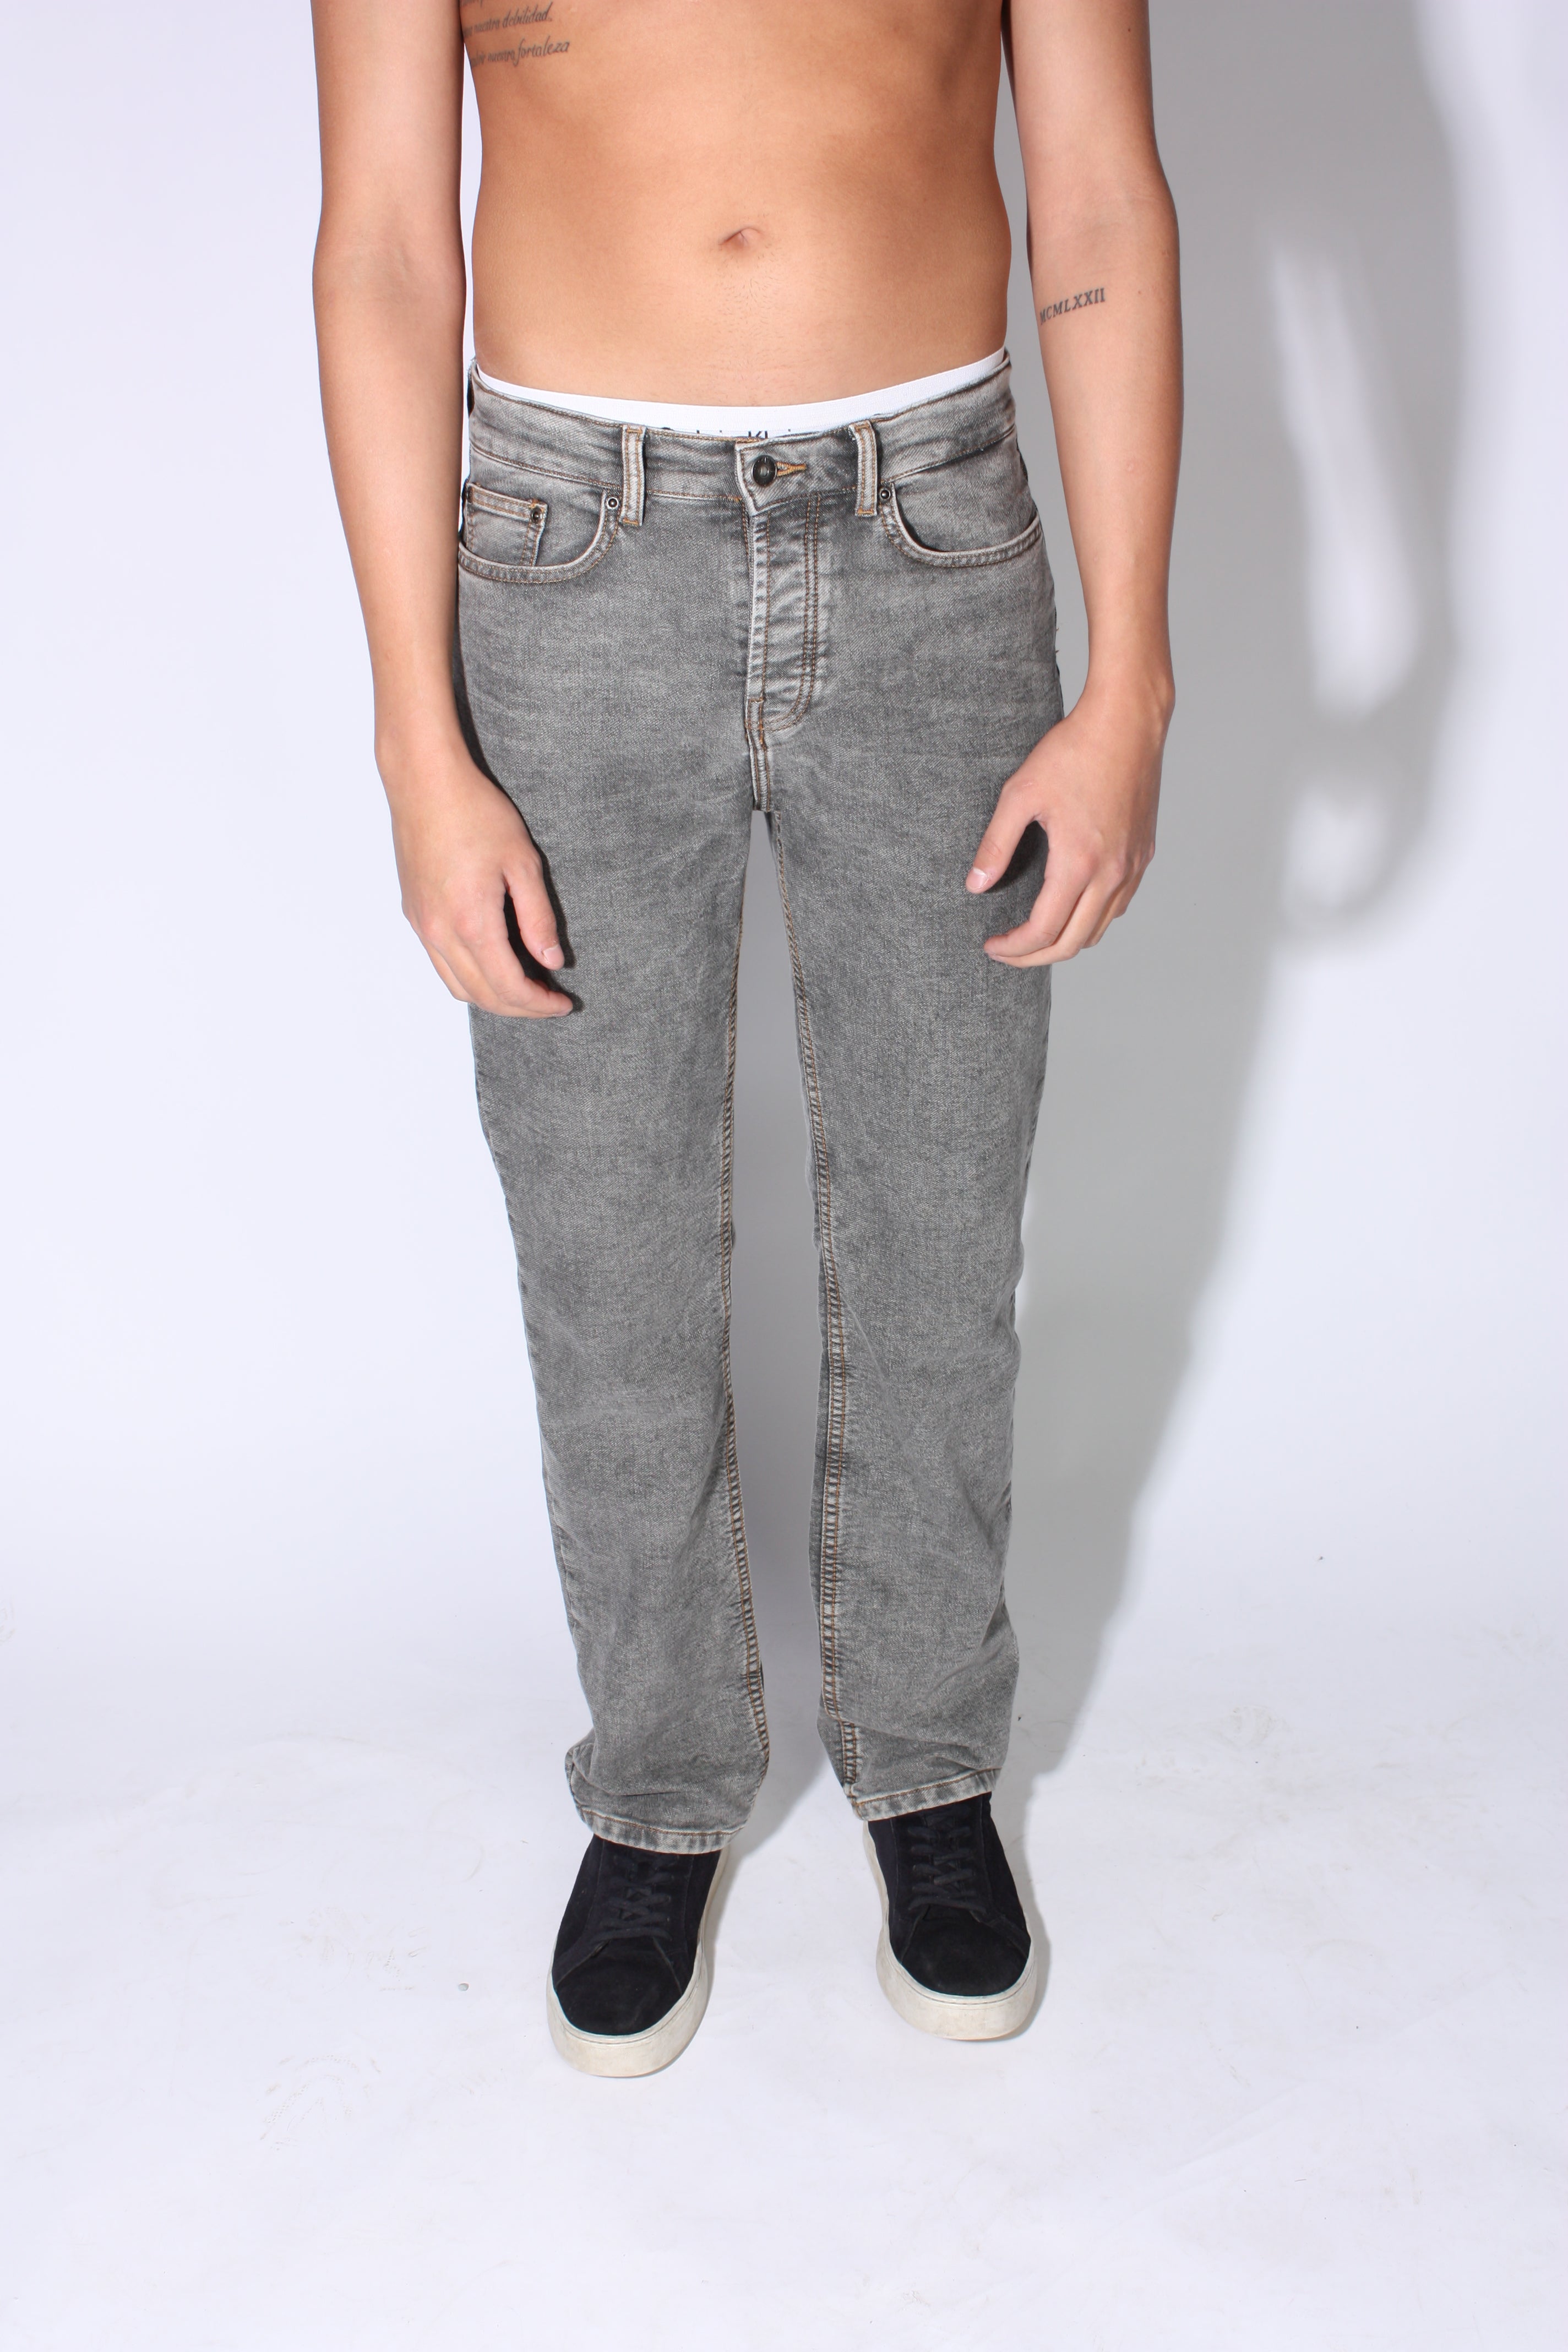 Stone Washed Grey Jeans